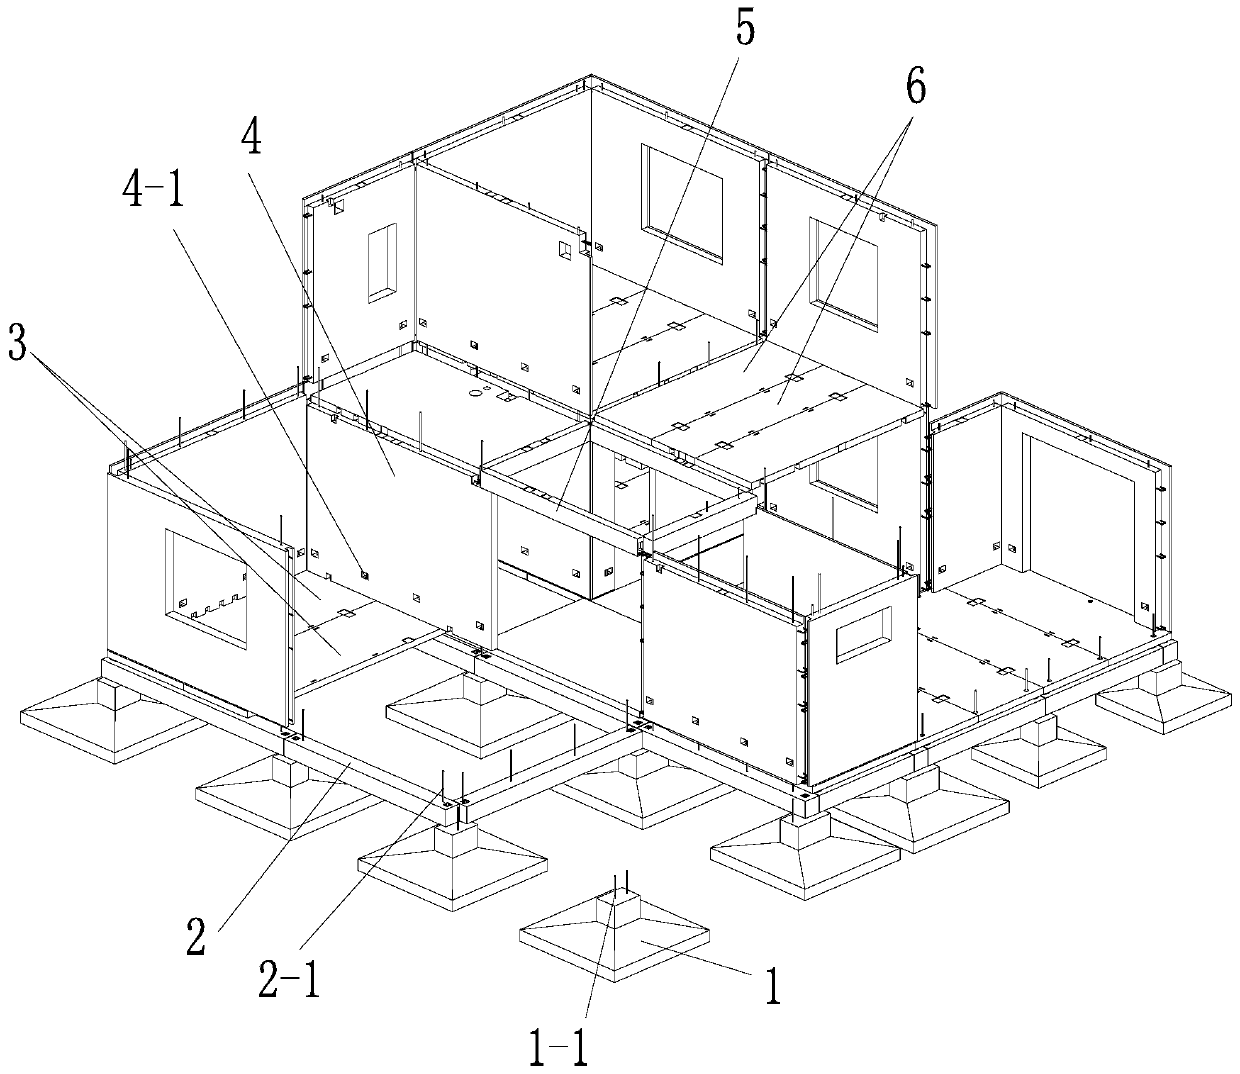 Construction method of a low-rise fully assembled concrete shear wall structure system